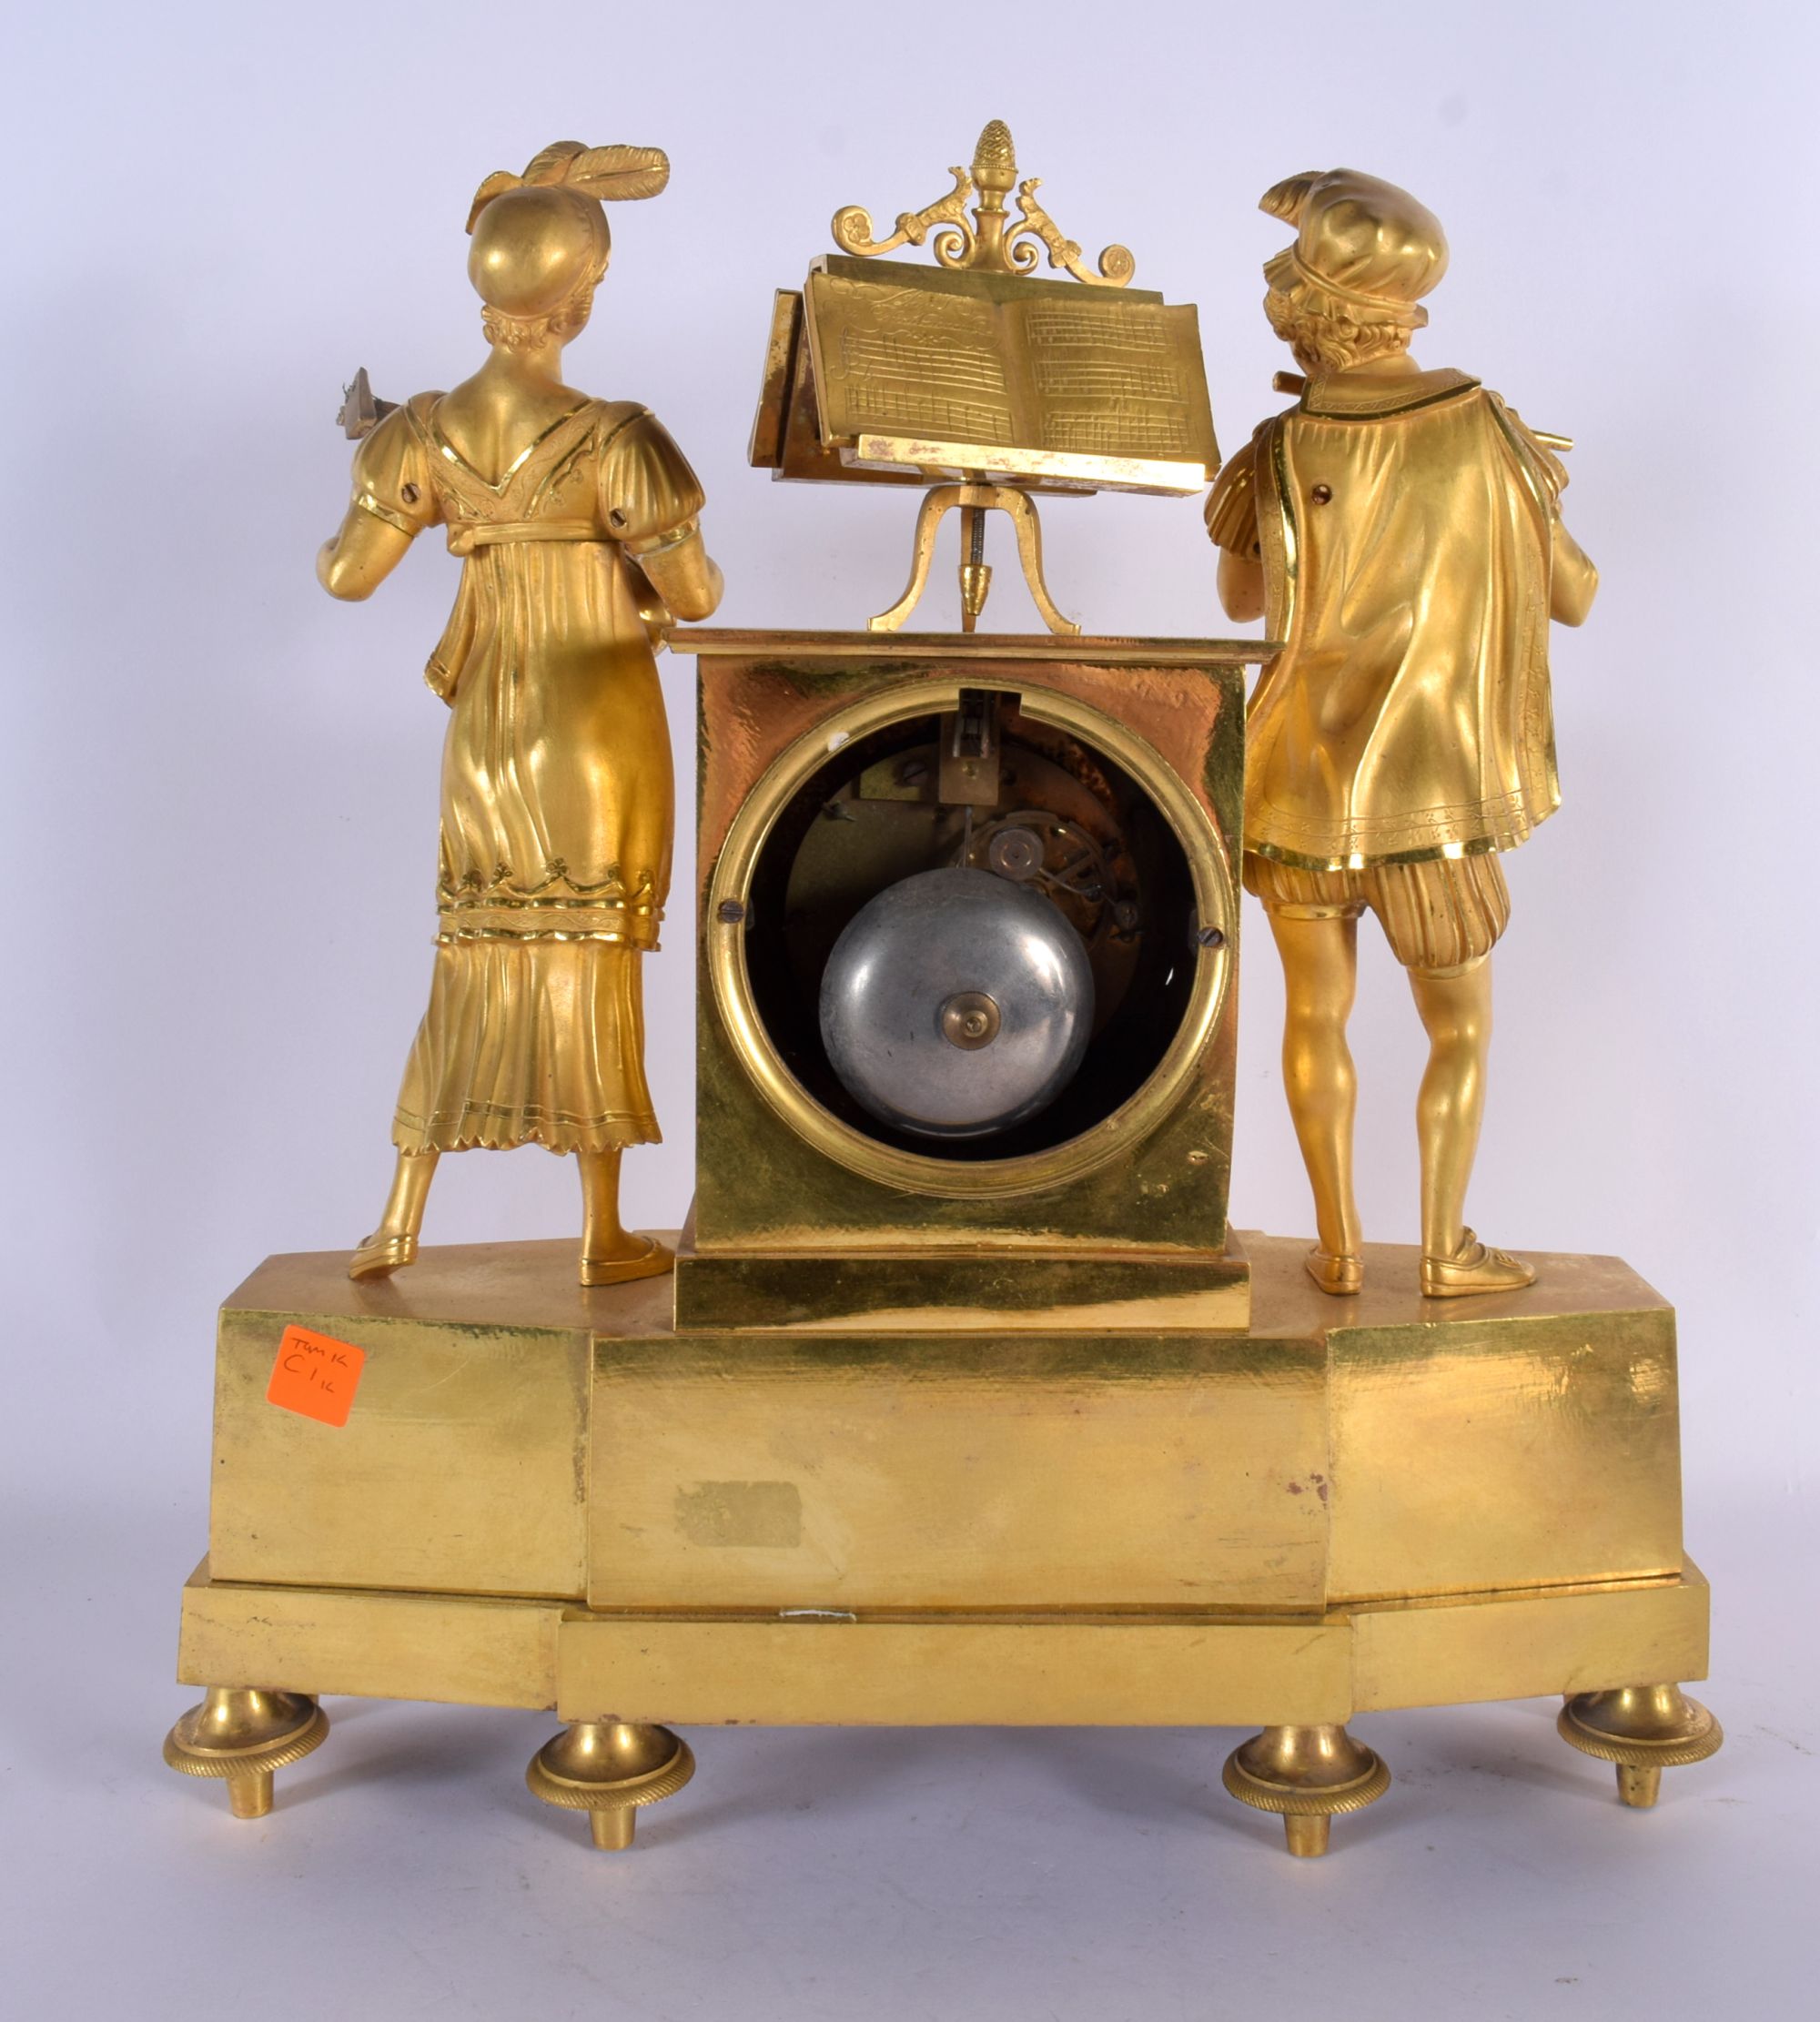 A LARGE EARLY 19TH CENTURY FRENCH GILT BRONZE EMPIRE MANTEL CLOCK formed as a figure and a female pl - Image 7 of 10